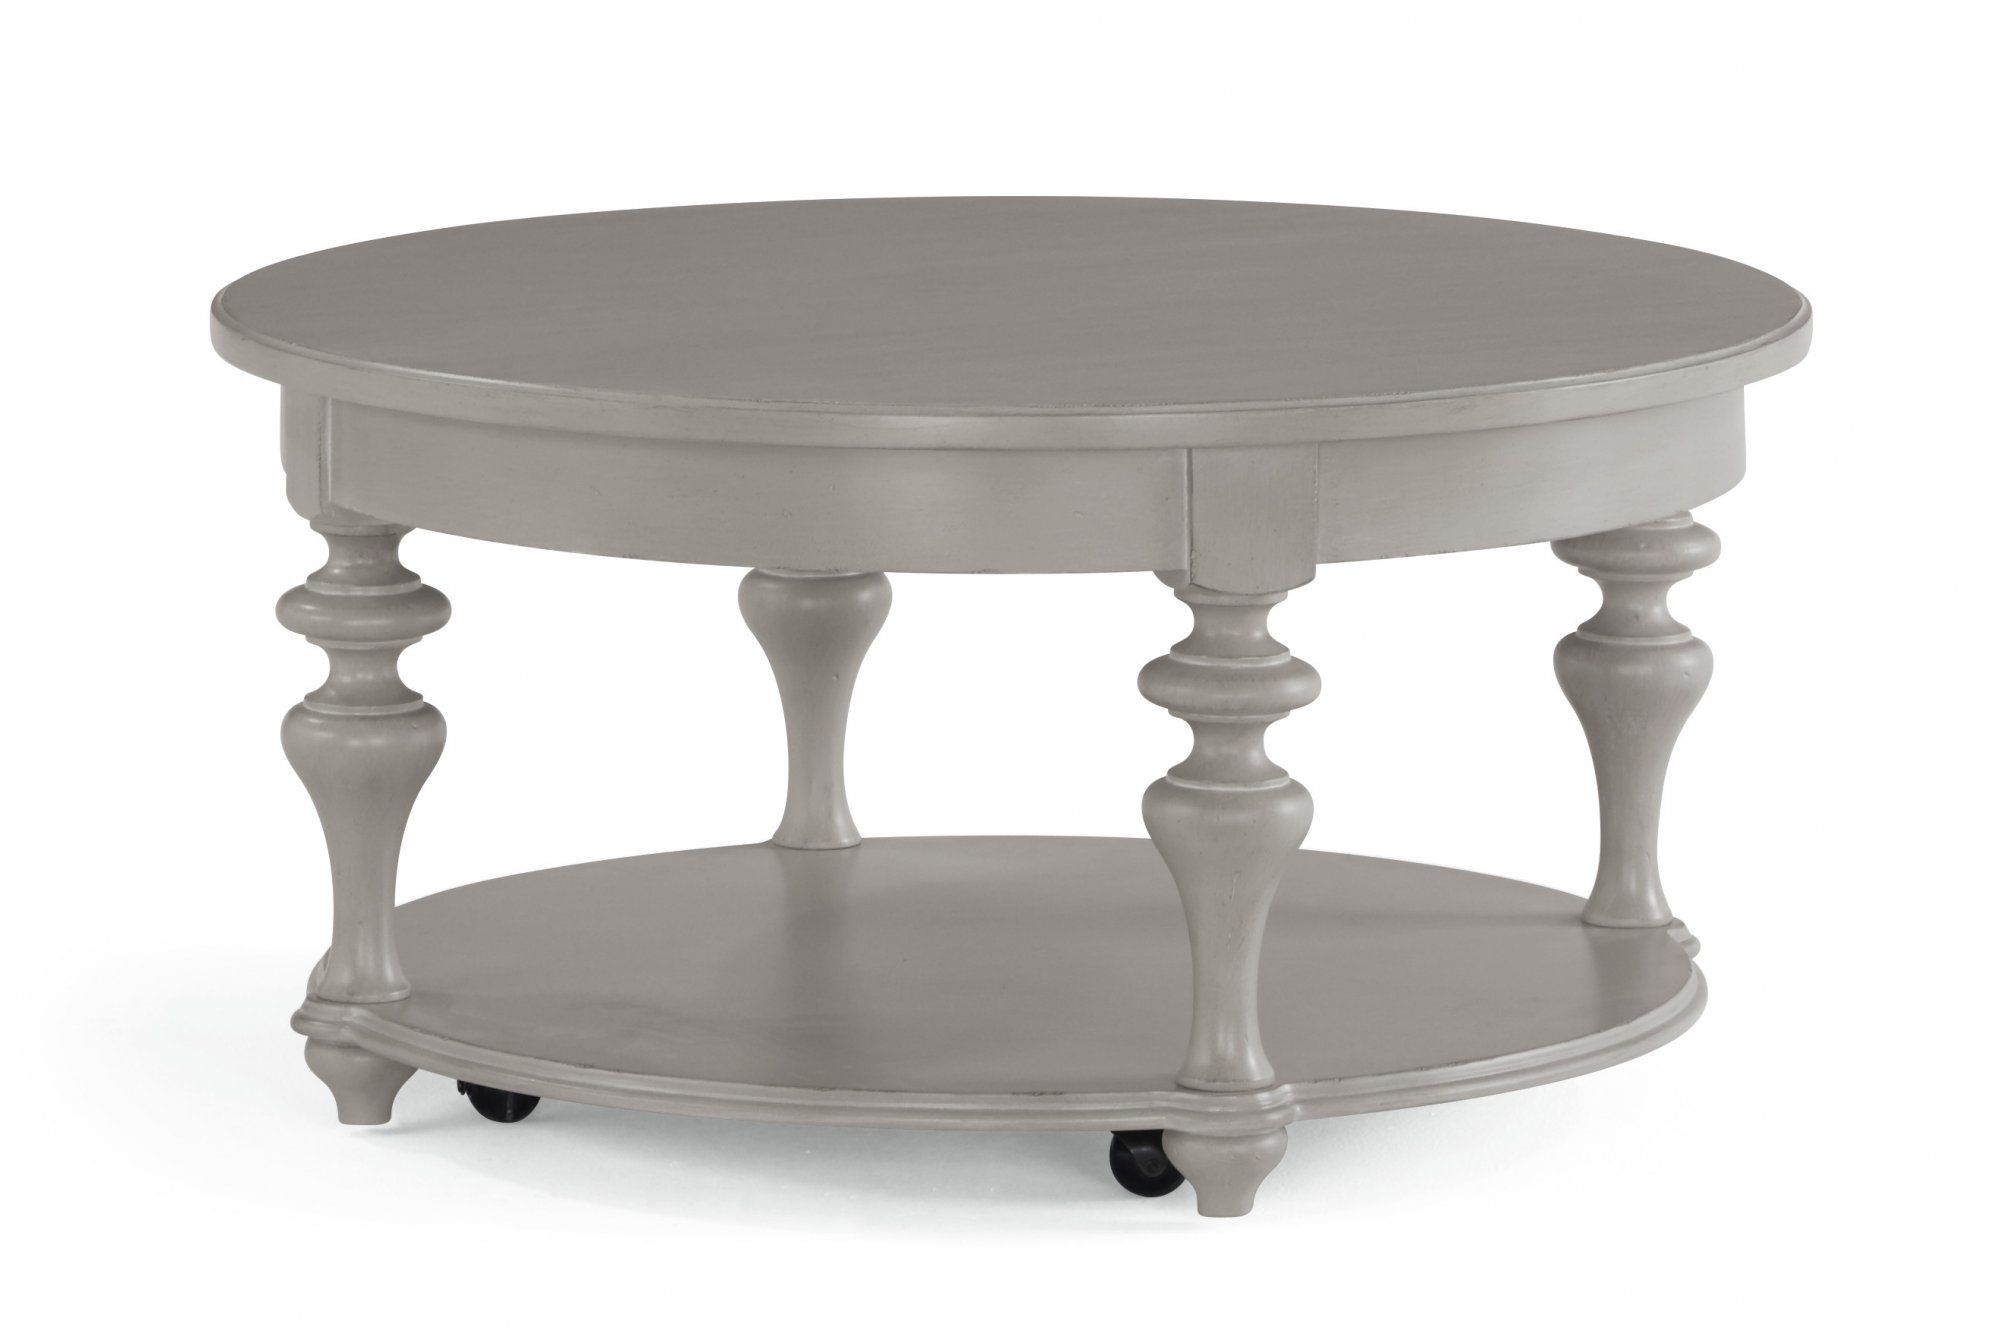 Heirloom Round Coffee Table With Casters W1065 0341flexsteel In Coffee Tables With Casters (View 15 of 21)